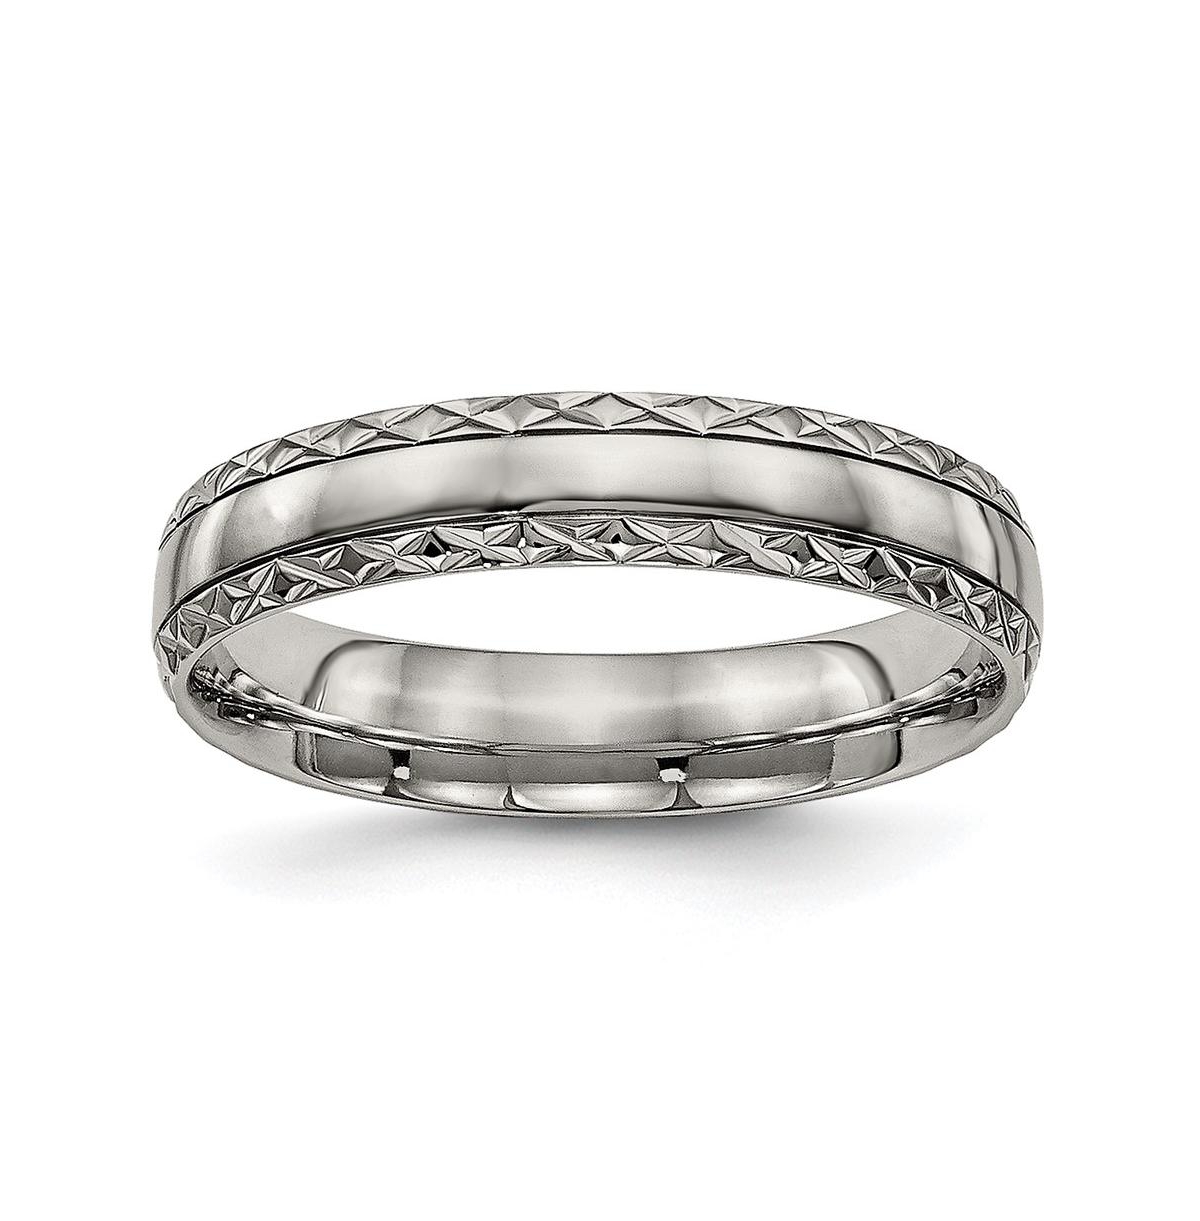 Titanium Polished Grooved Criss Cross Design Wedding Band Ring - White